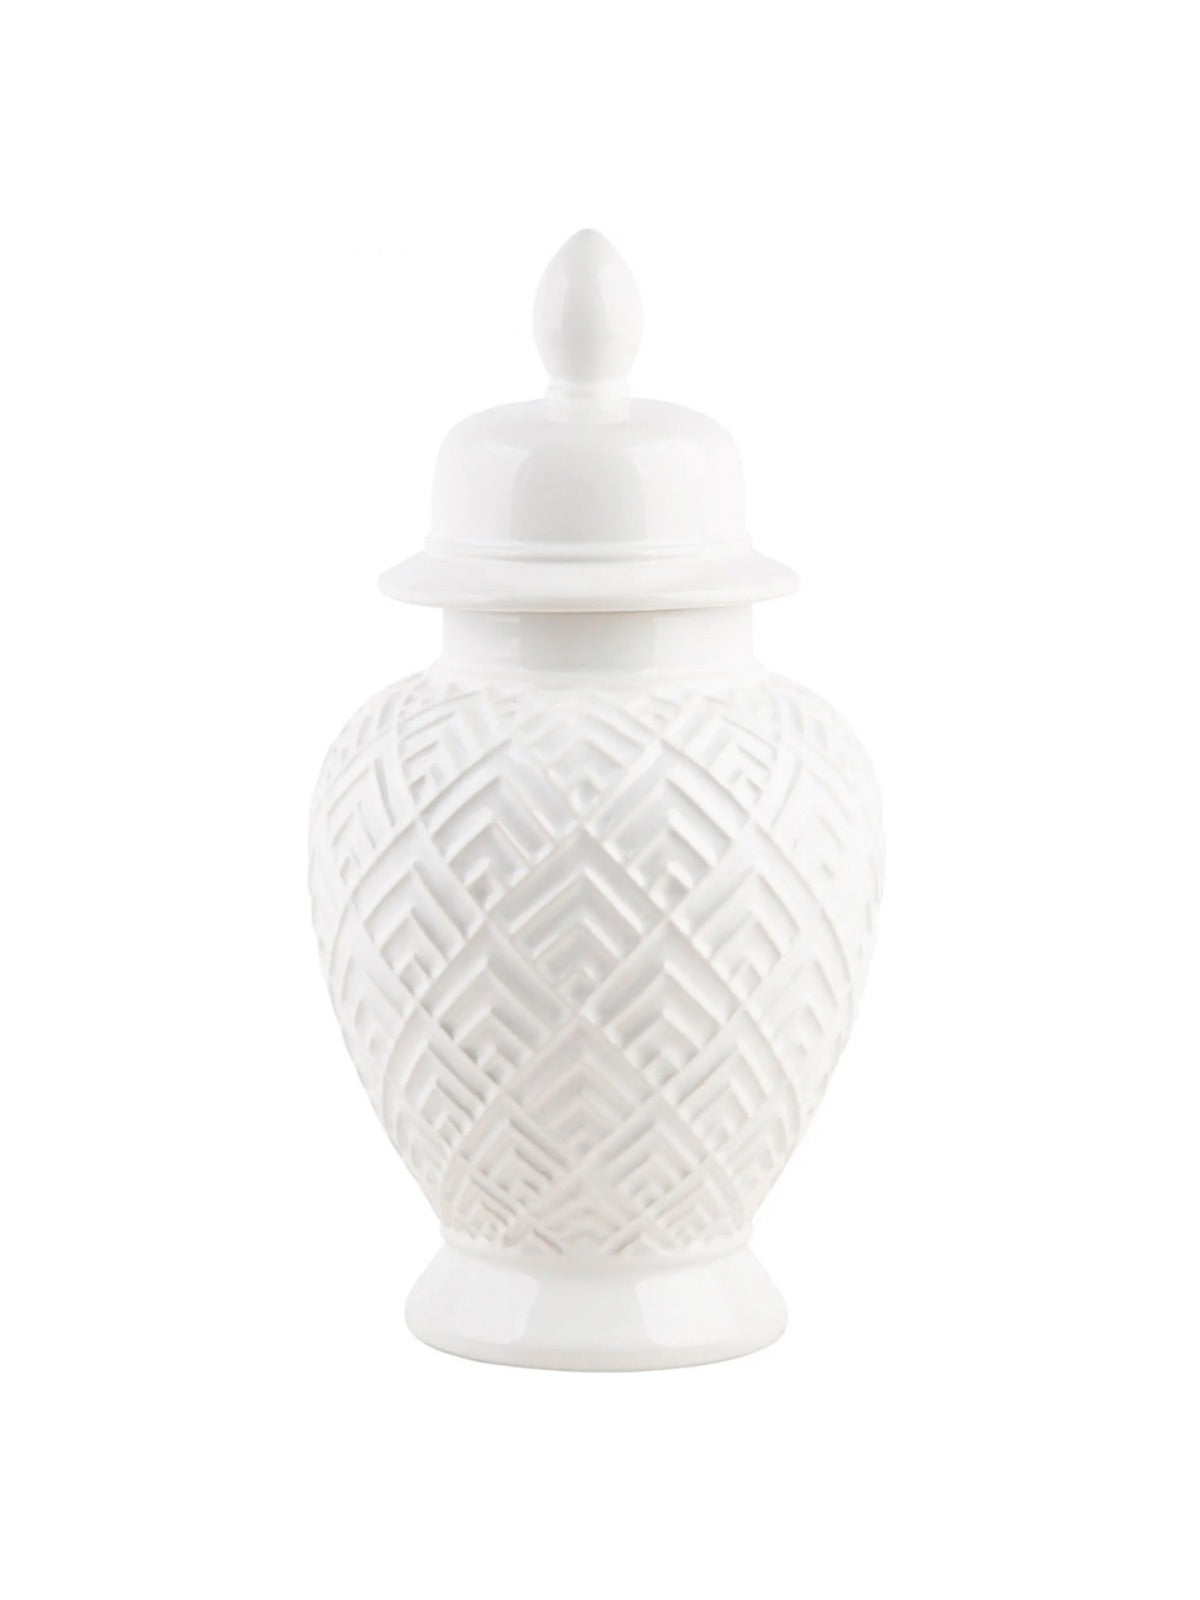 12.5H White ceramic ginger jar with diamond patterns with removable lid sold by KYA Home Decor.